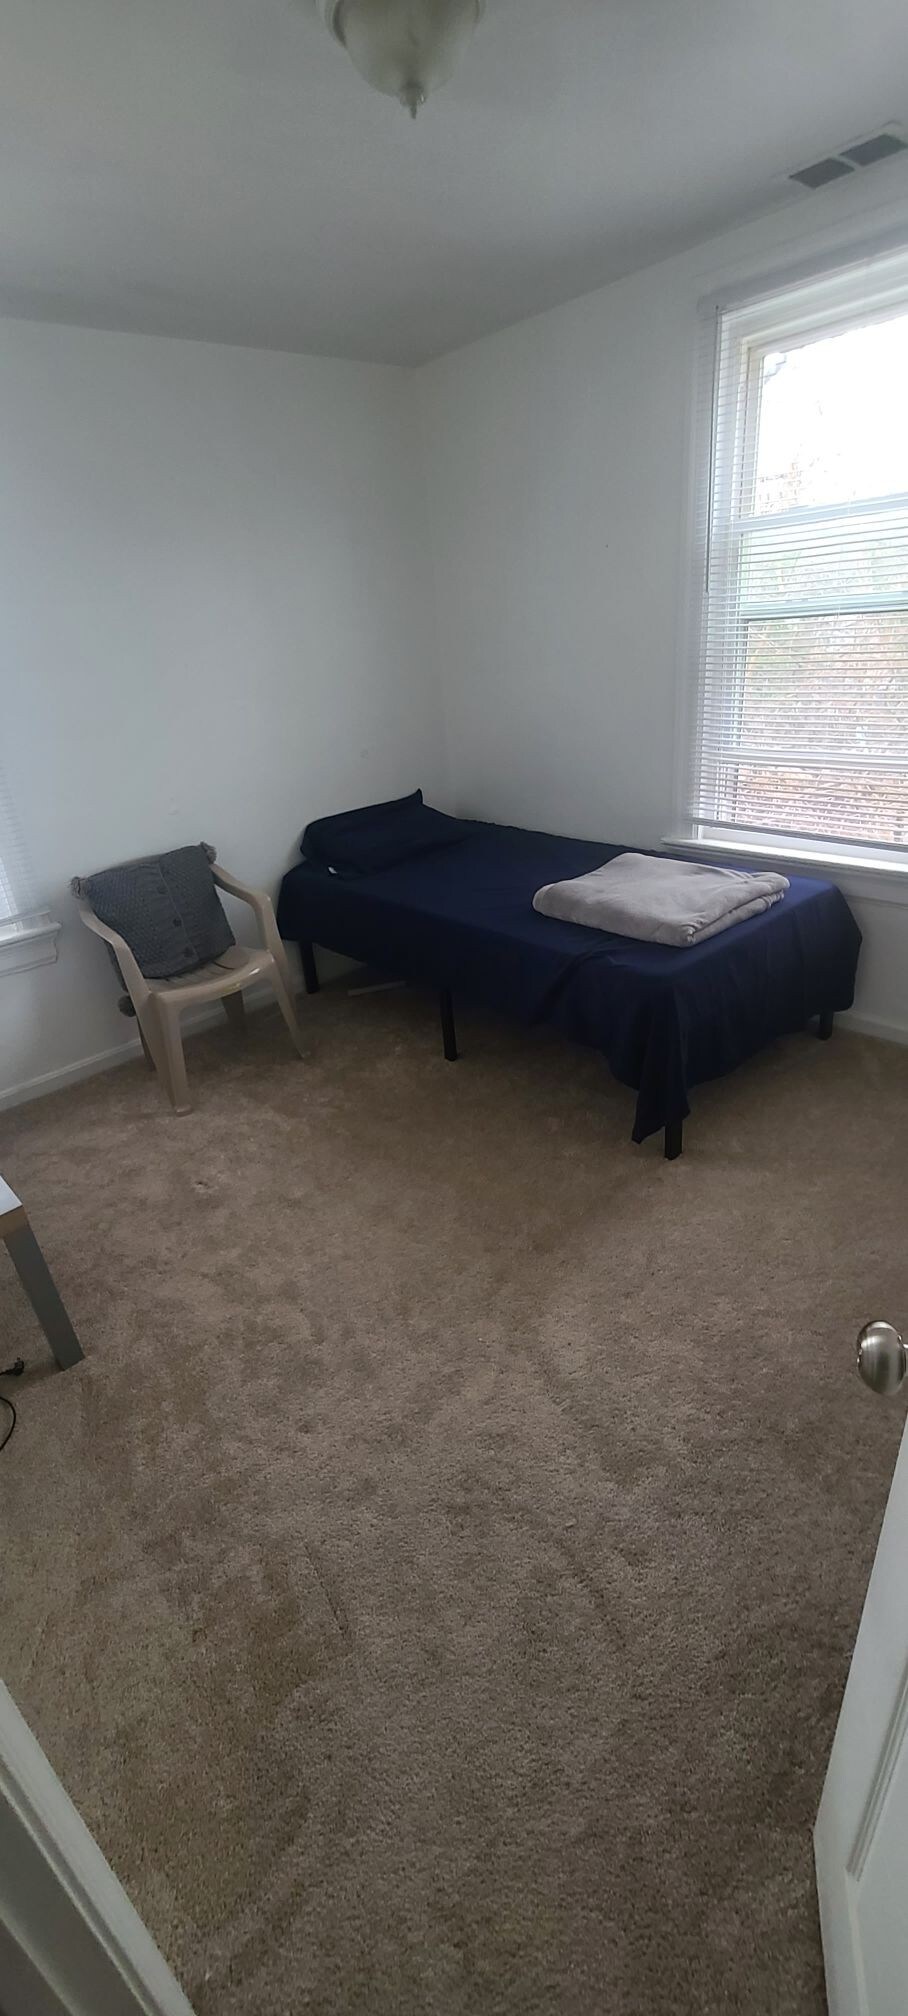 Safe, quiet 420 room for you. Minutes from DC